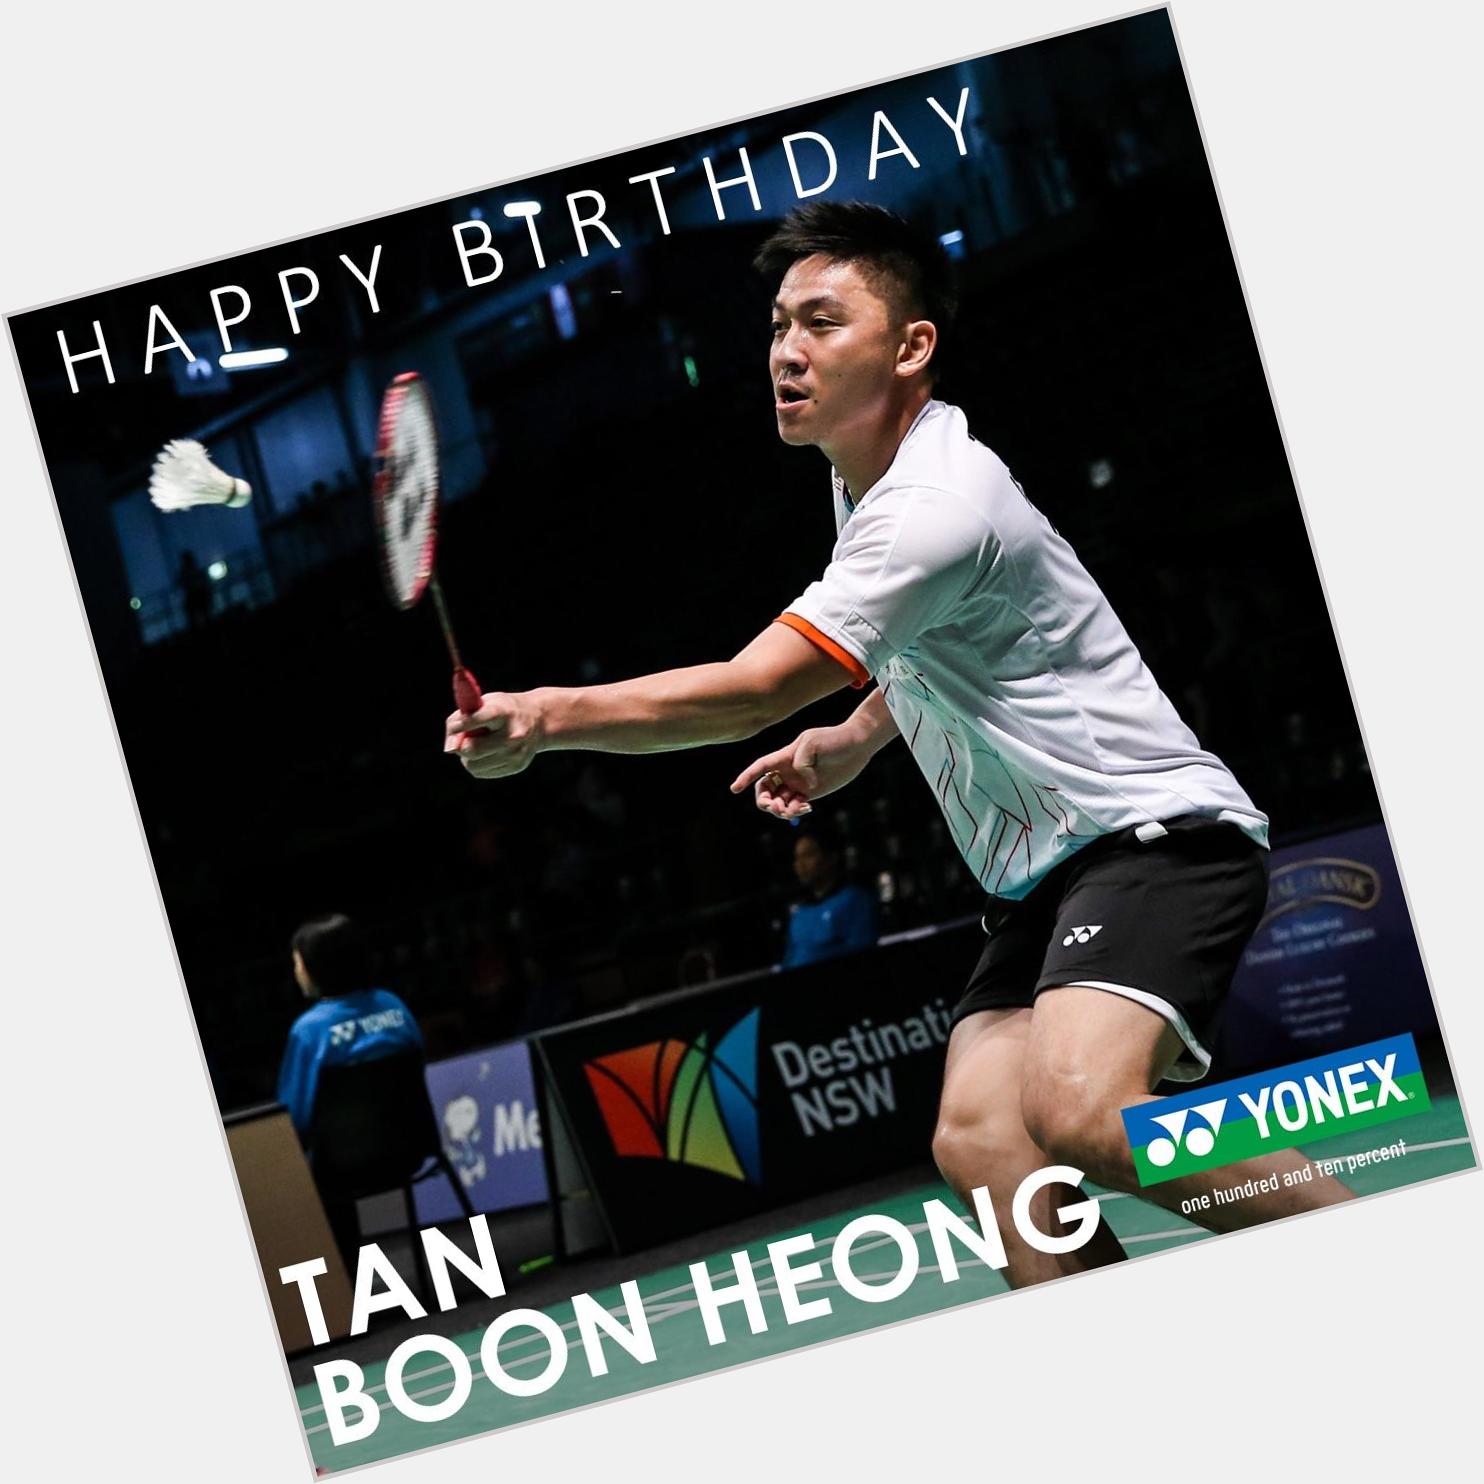 Happy birthday wishes to Malaysian doubles expert Tan Boon Heong! 